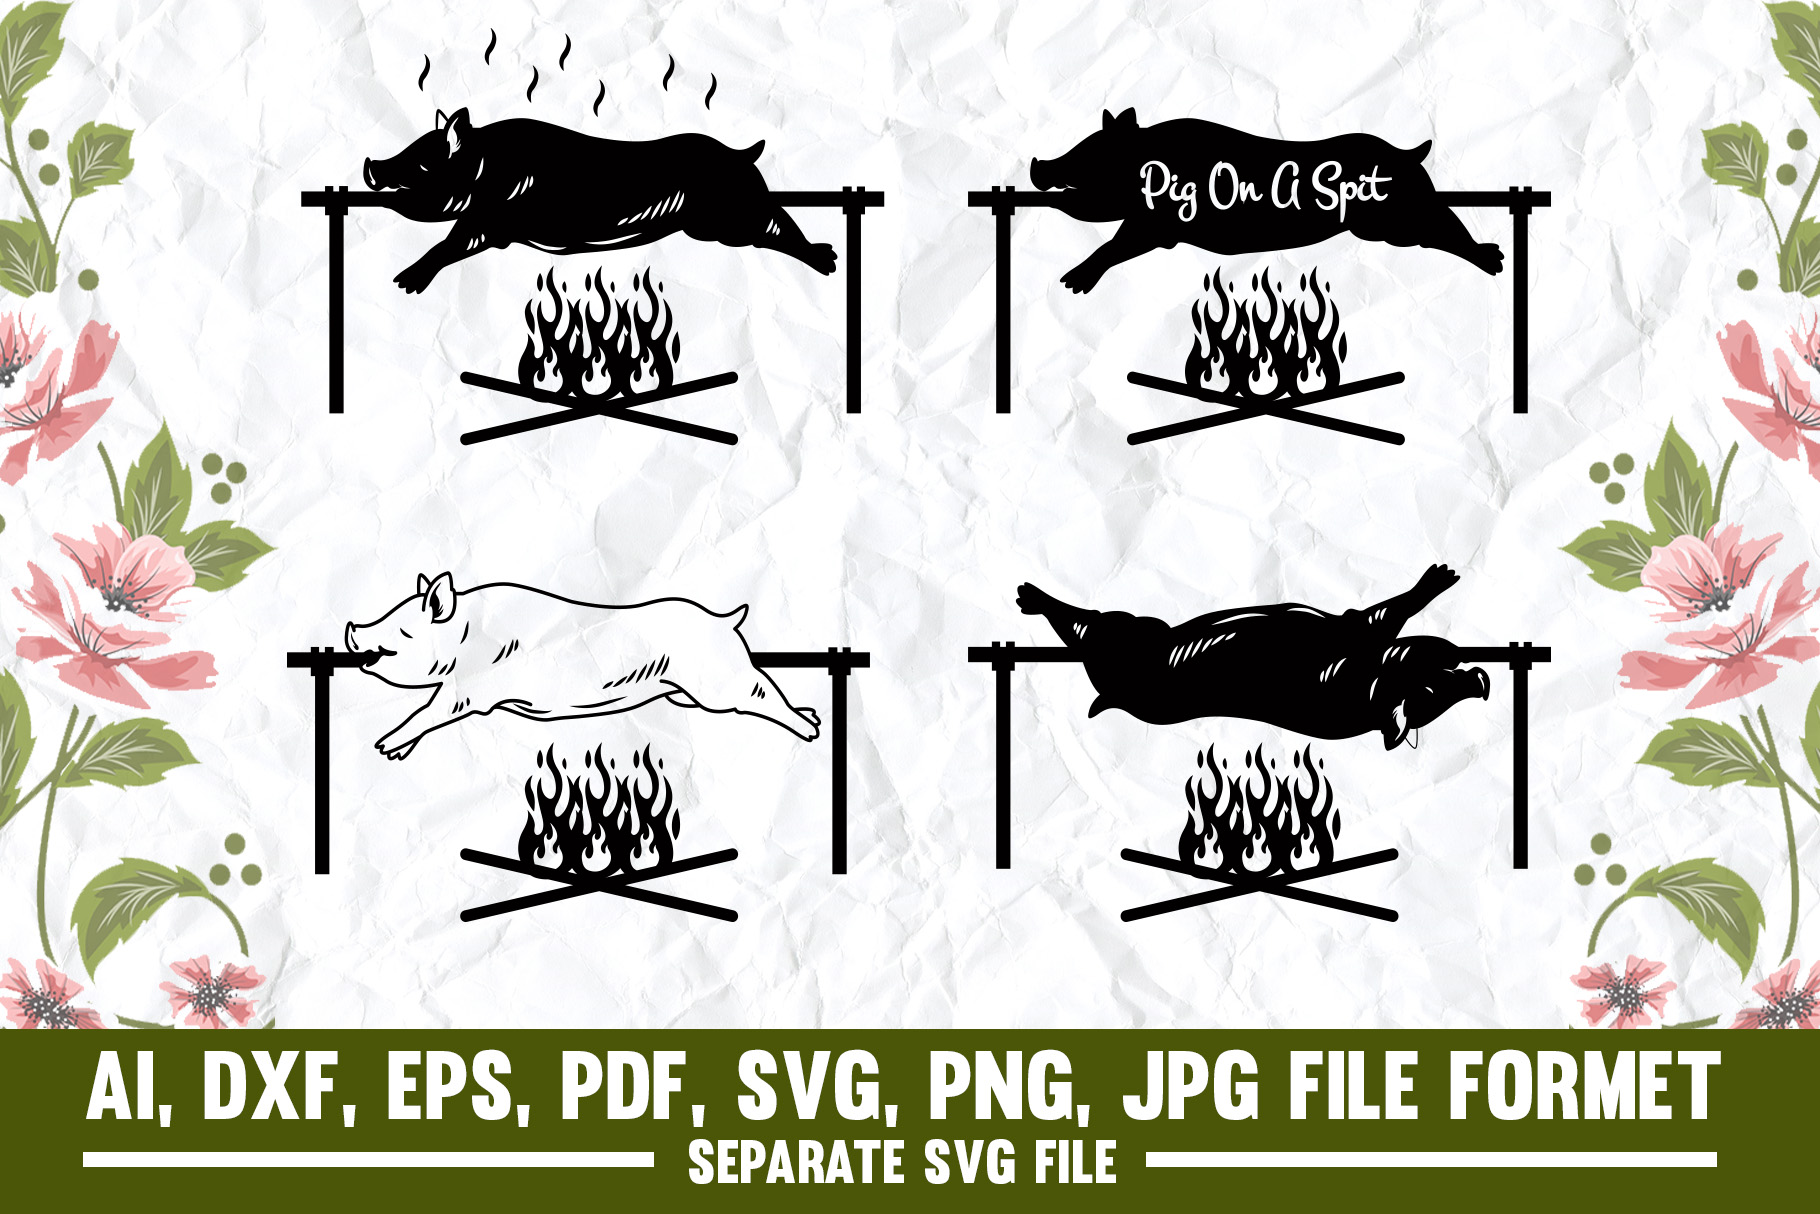 Roasted Pig SVG Fast Food Silhouette previews.